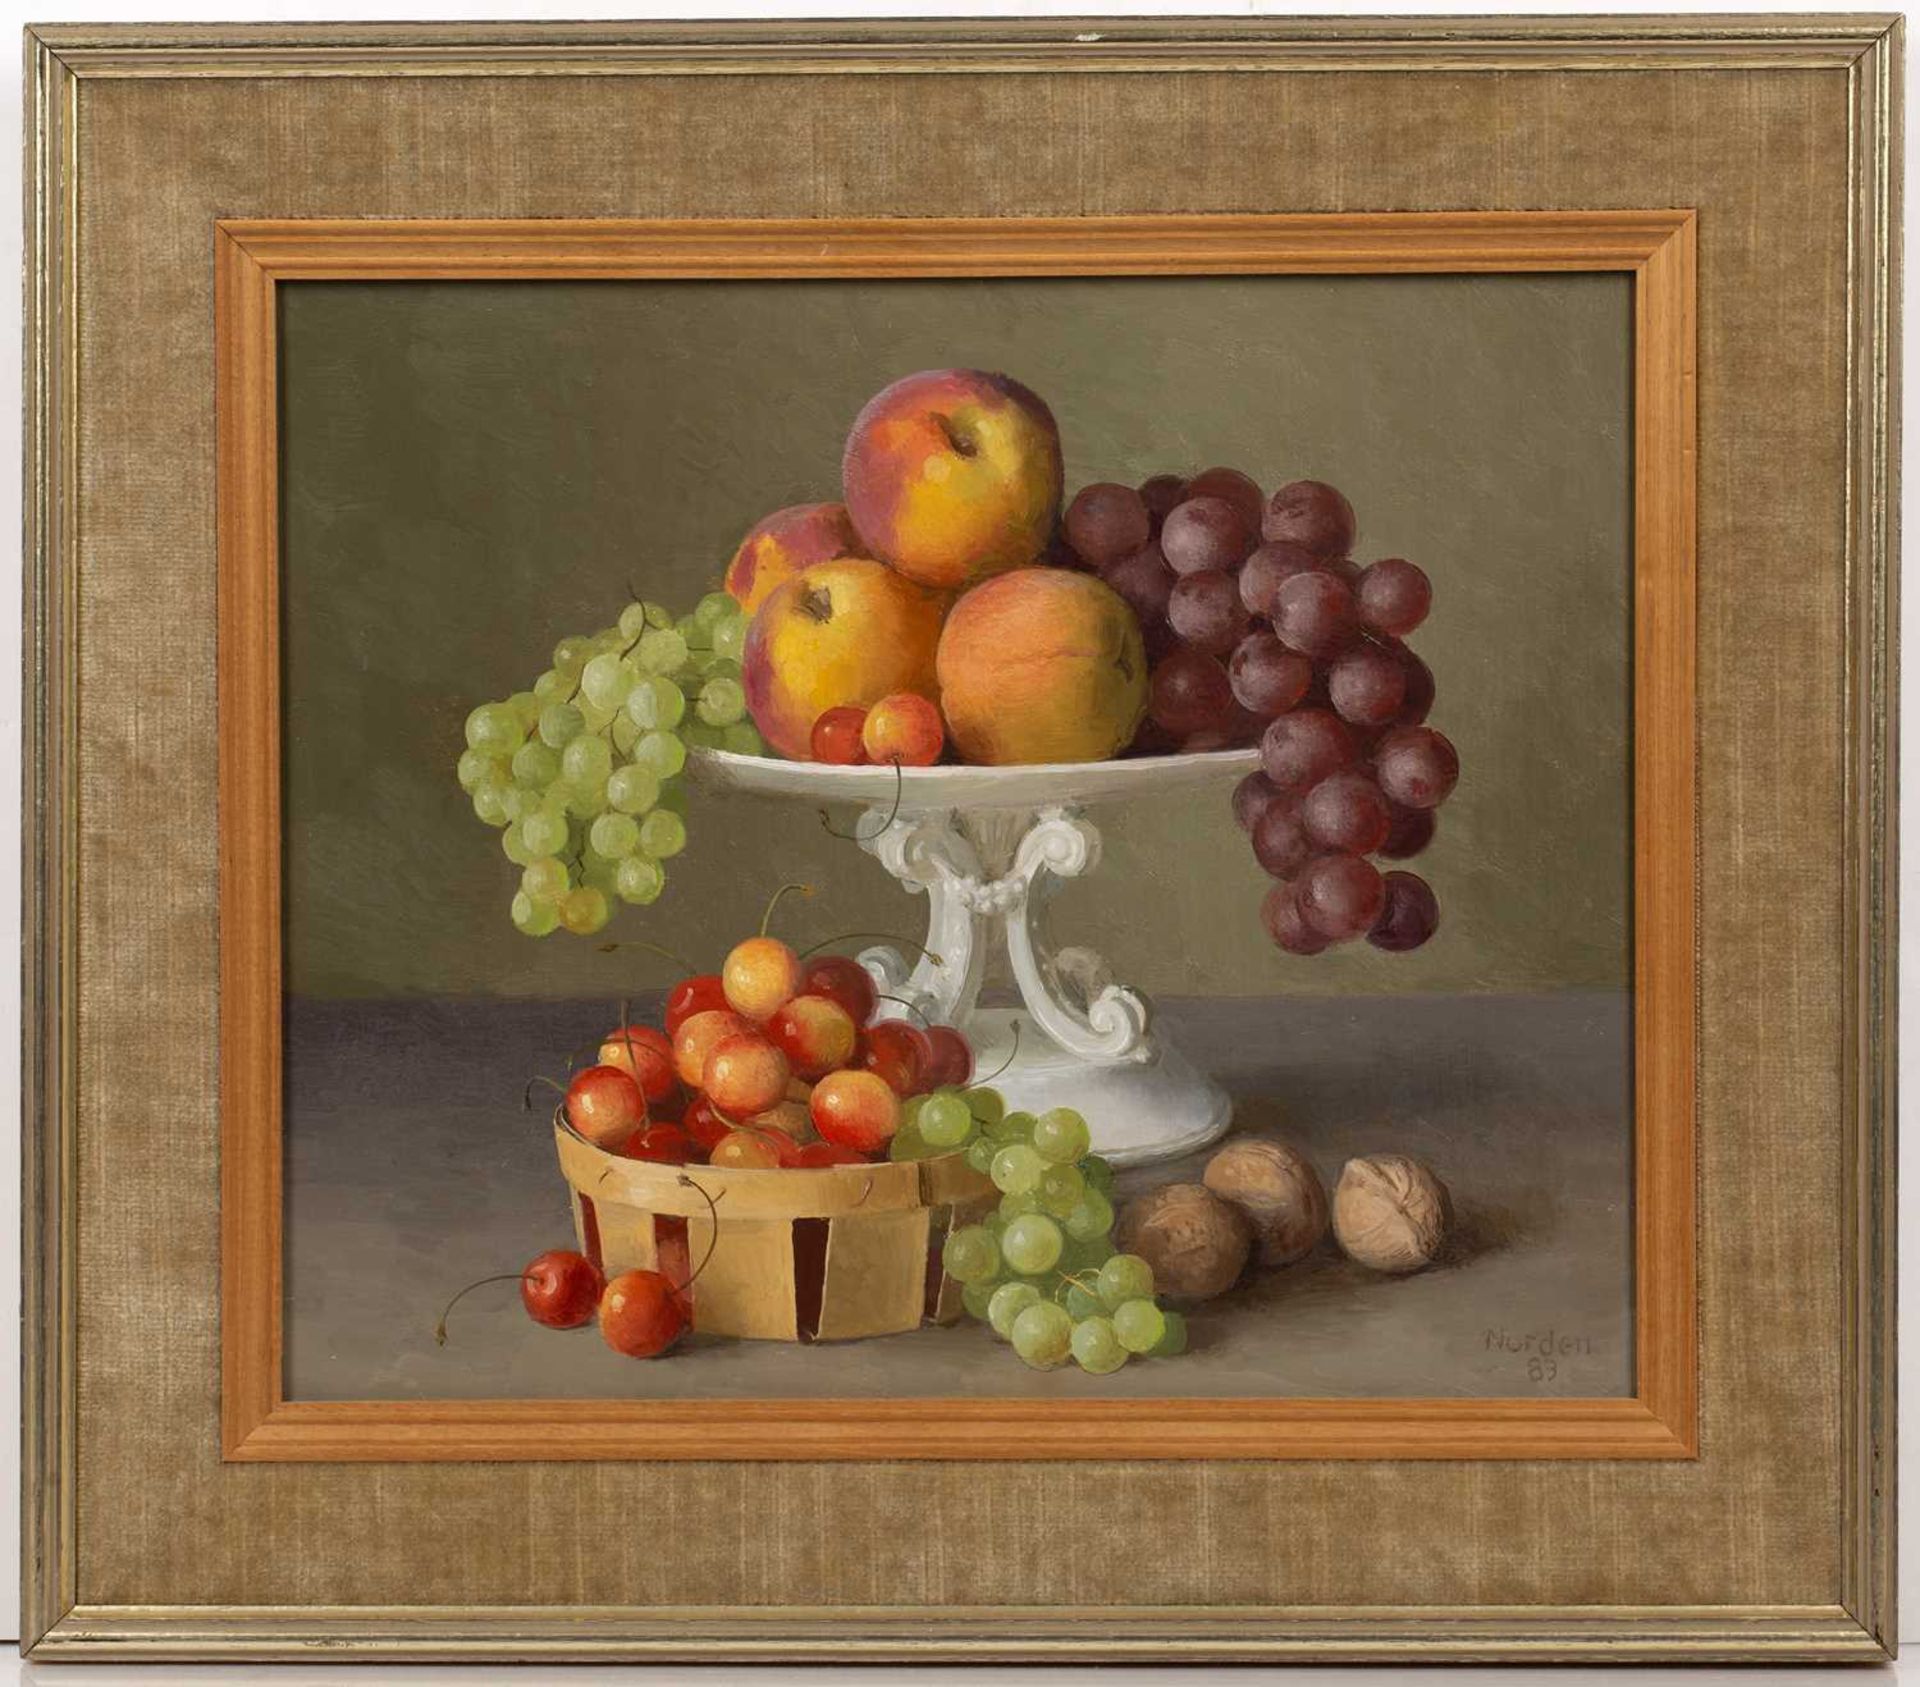 Gerald Norden (1912-2000) 'Untitled still life of fruit', oil on board, signed and dated 1983 - Image 2 of 3